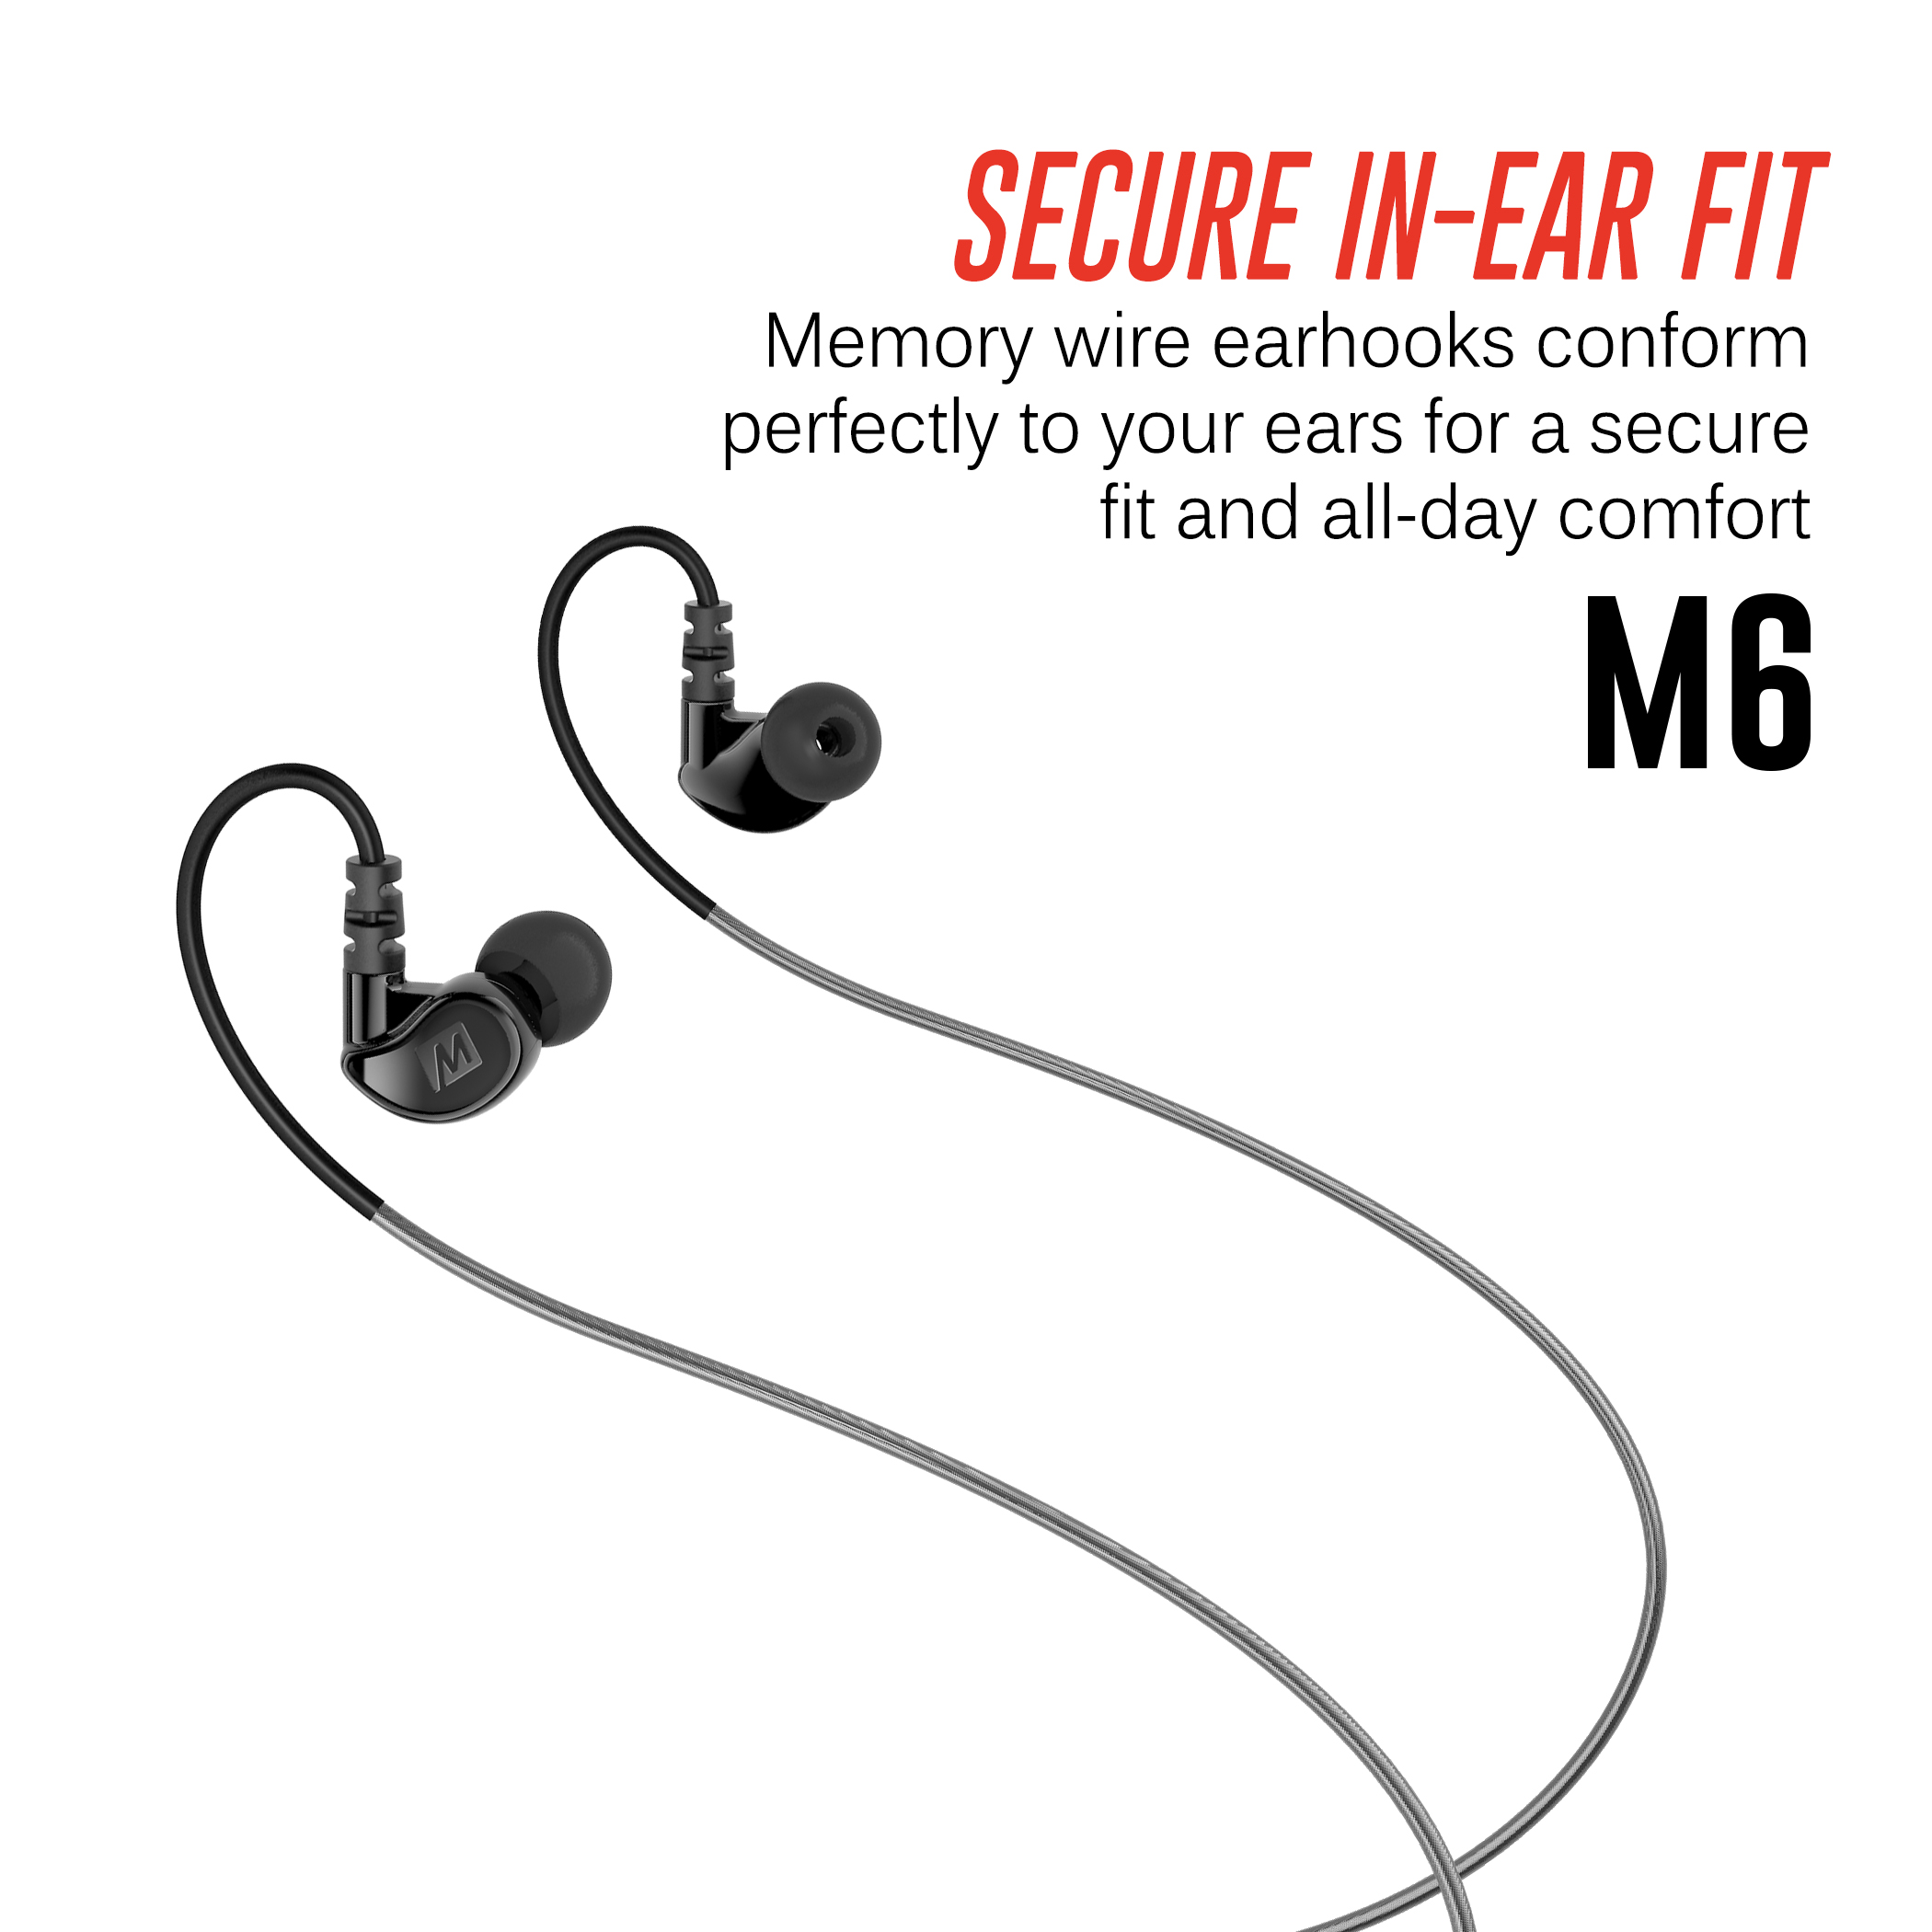 MEE audio M6 Sport Wired Earbuds, Noise Isolating In Ear Headphones, Sweatproof Earphones for Running/Gym/Workouts with Dynamic Enhanced Bass Sound, Memory Wire Earhooks, 3.5mm Jack Plug (Black) - image 4 of 9